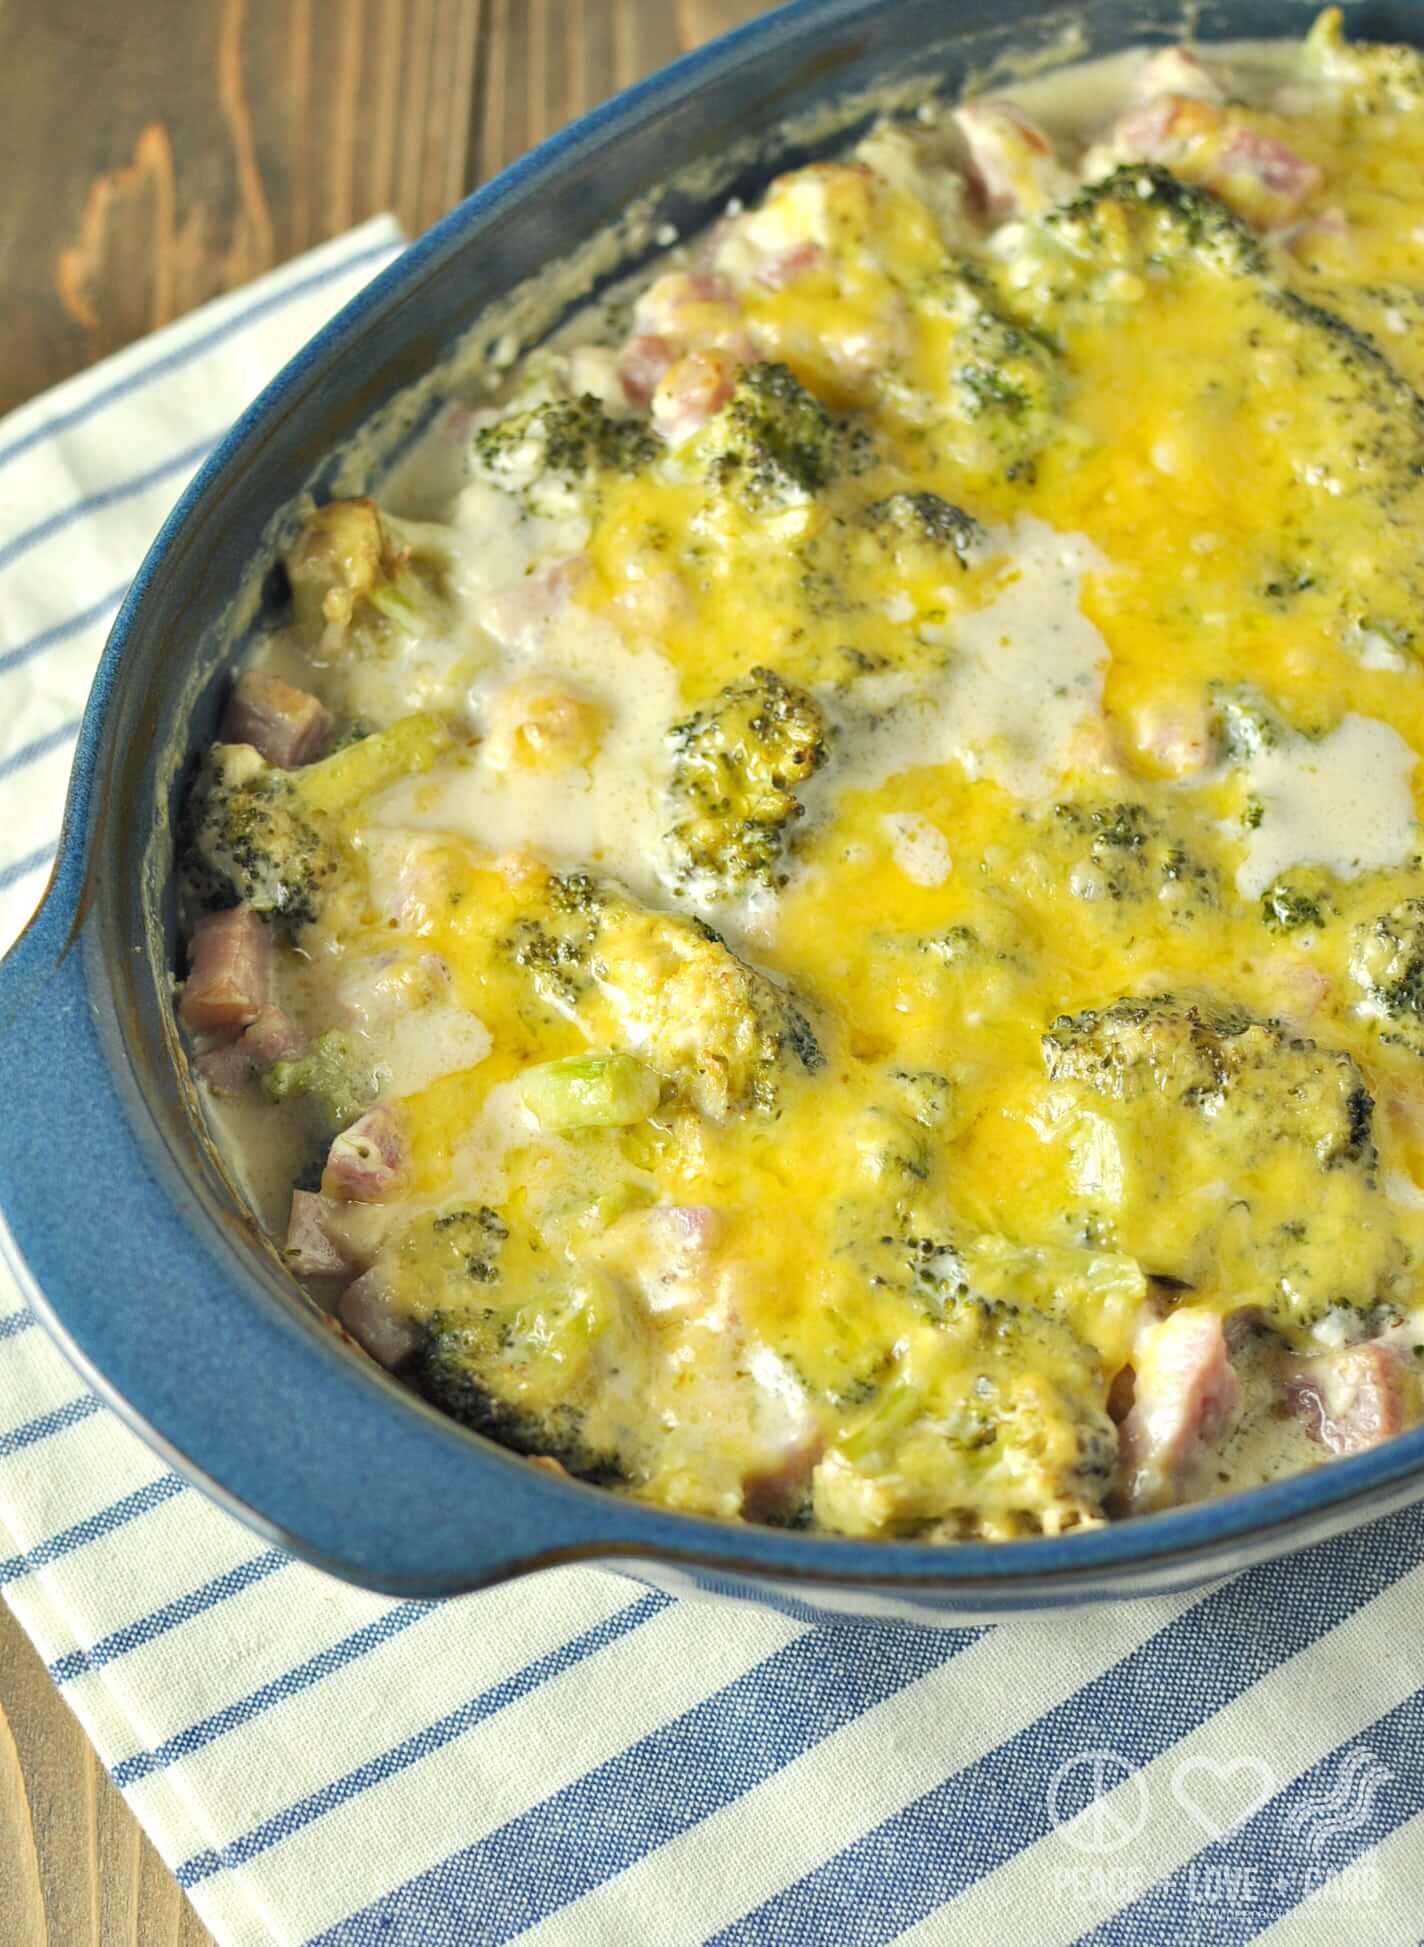 Low Carb Three Cheese Ham and Broccoli Casserole | Nutritious Keto & Low Carb Casserole Recipes | heall